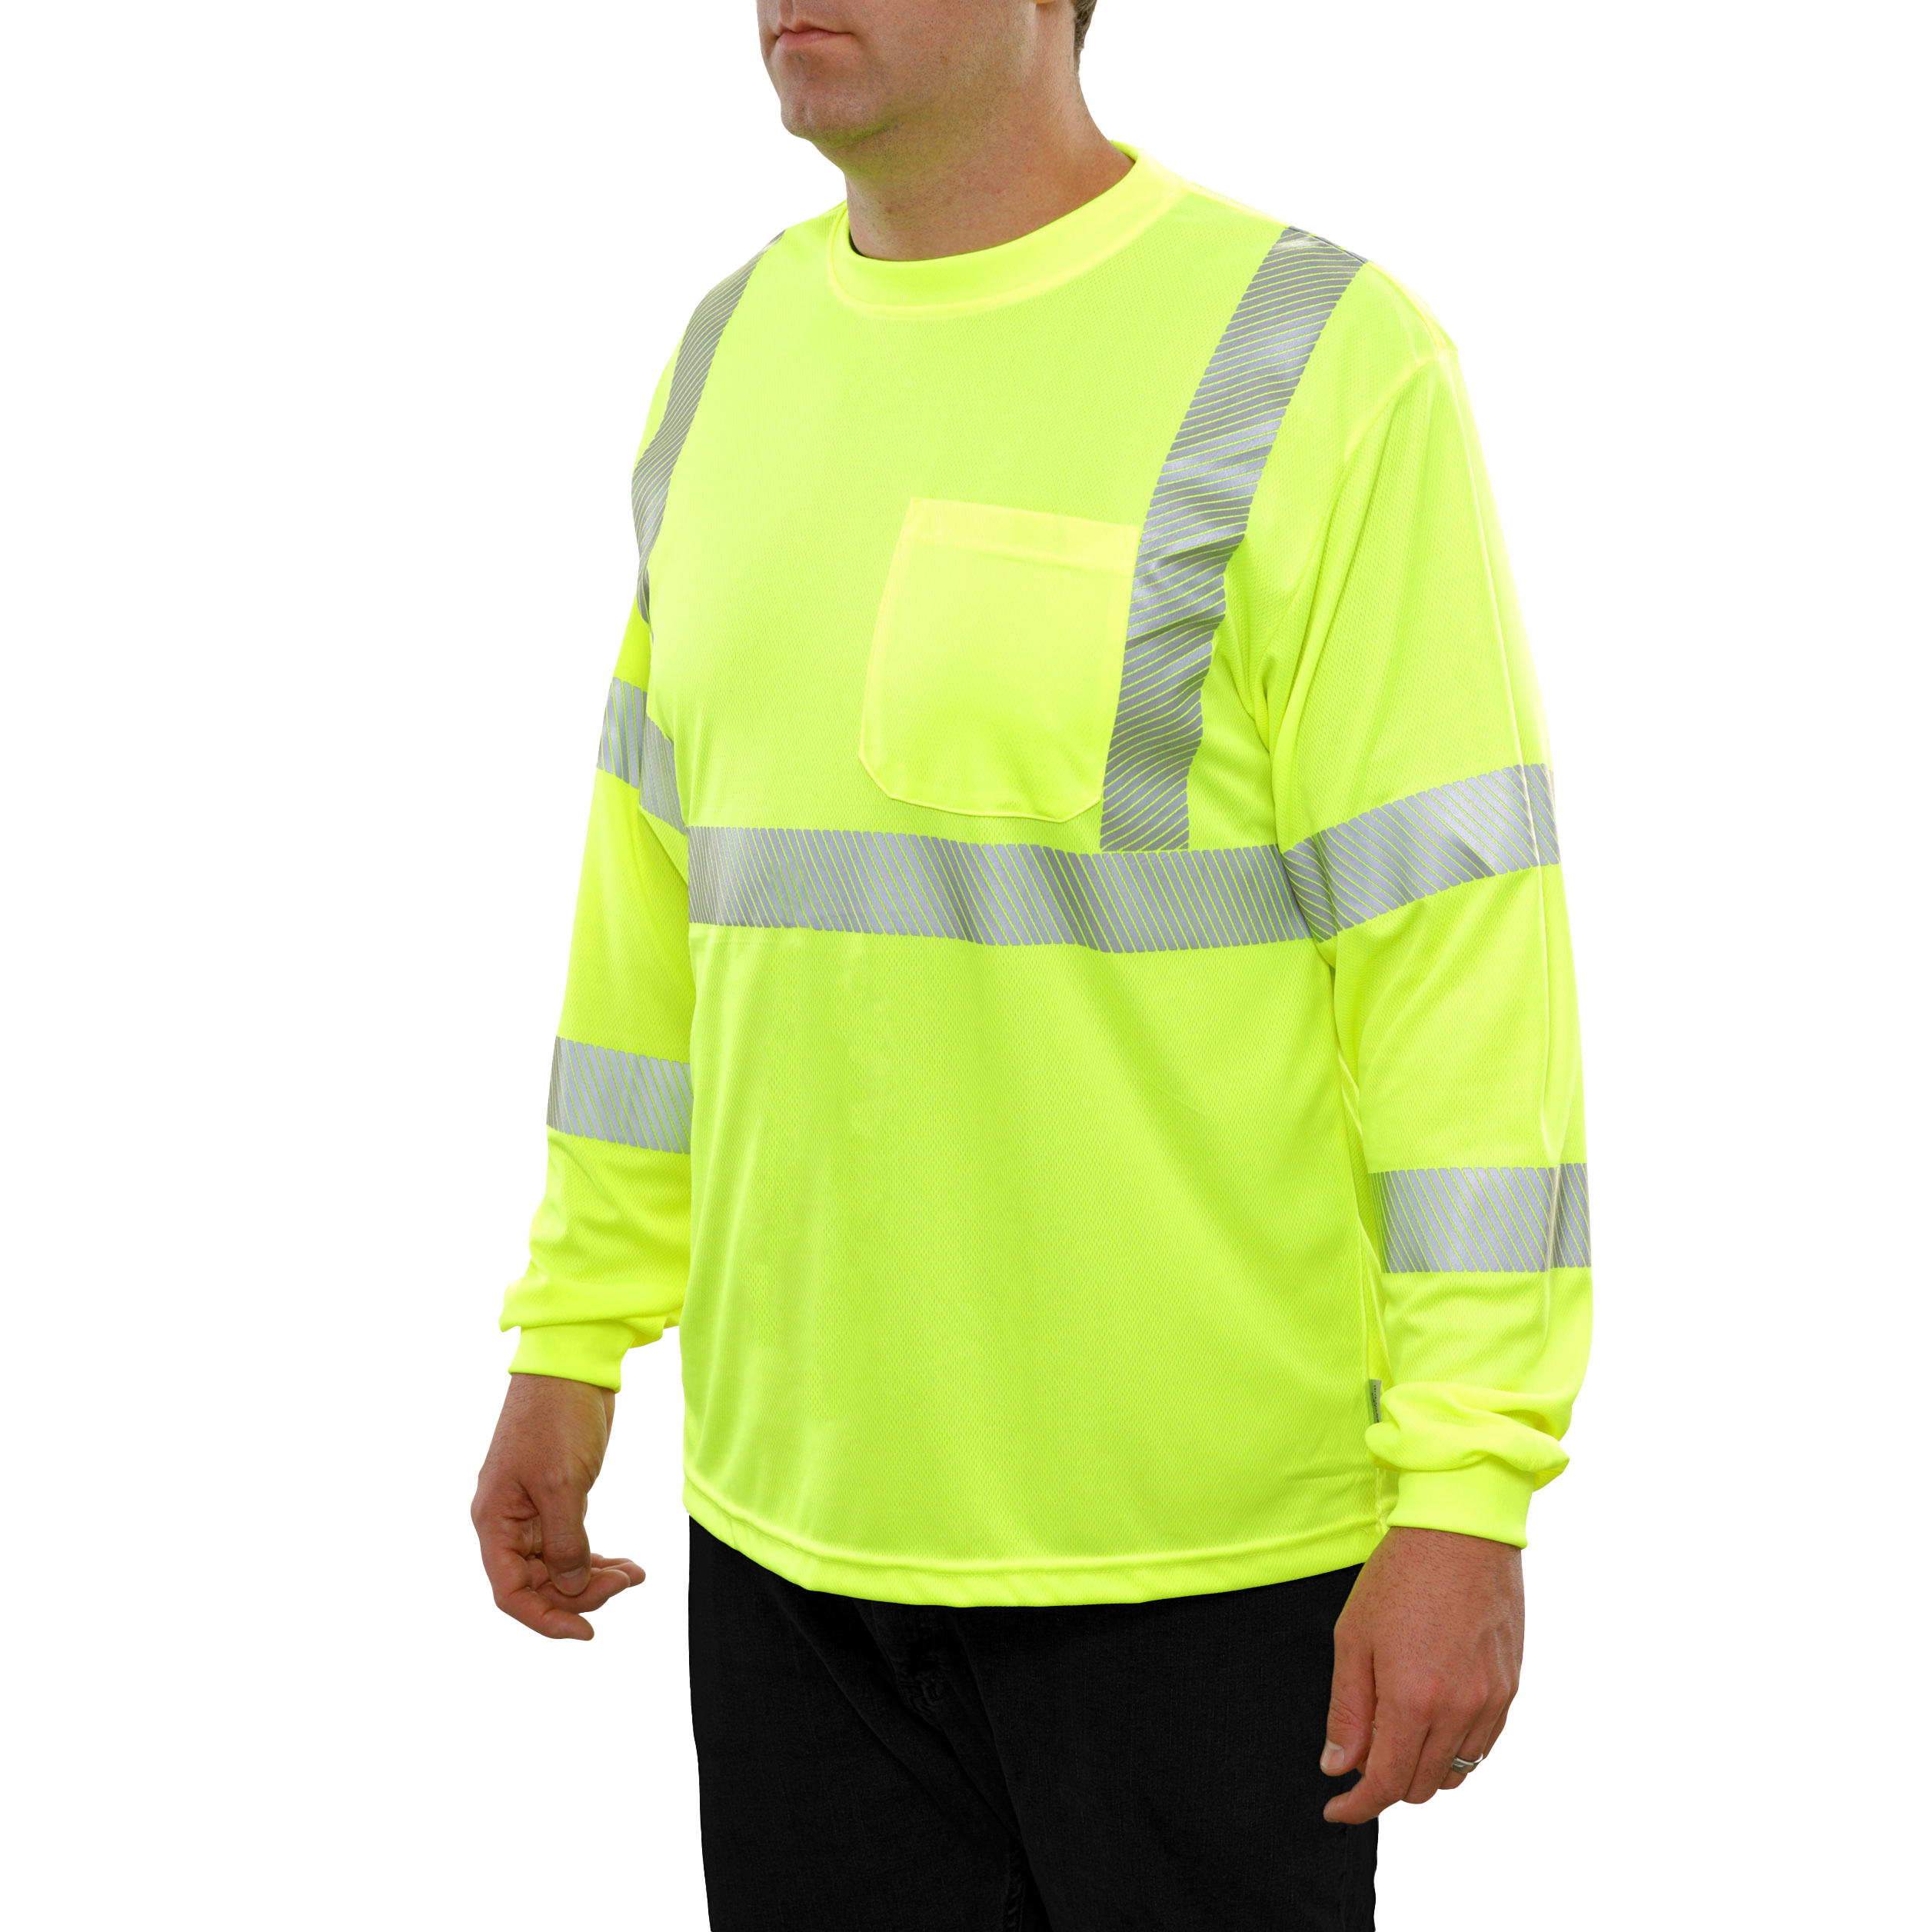 5-level Protective Gear with Round Neck and Long Sleeves, Safety Protection 